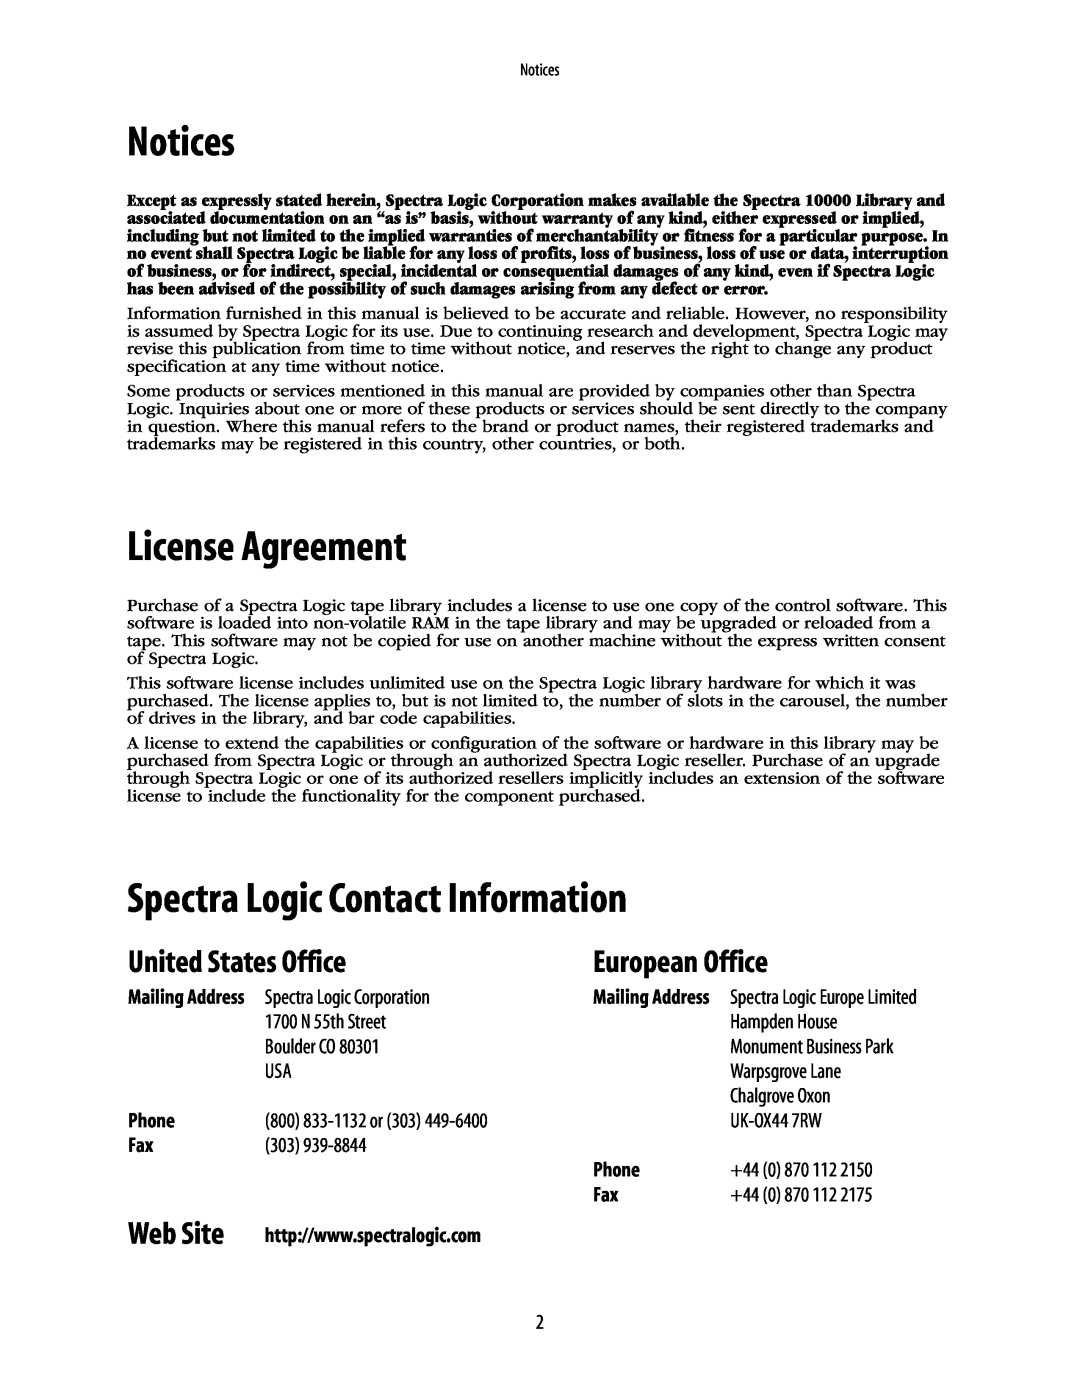 Spectra Logic 10000 Notices, License Agreement, Spectra Logic Contact Information, United States Office, European Office 